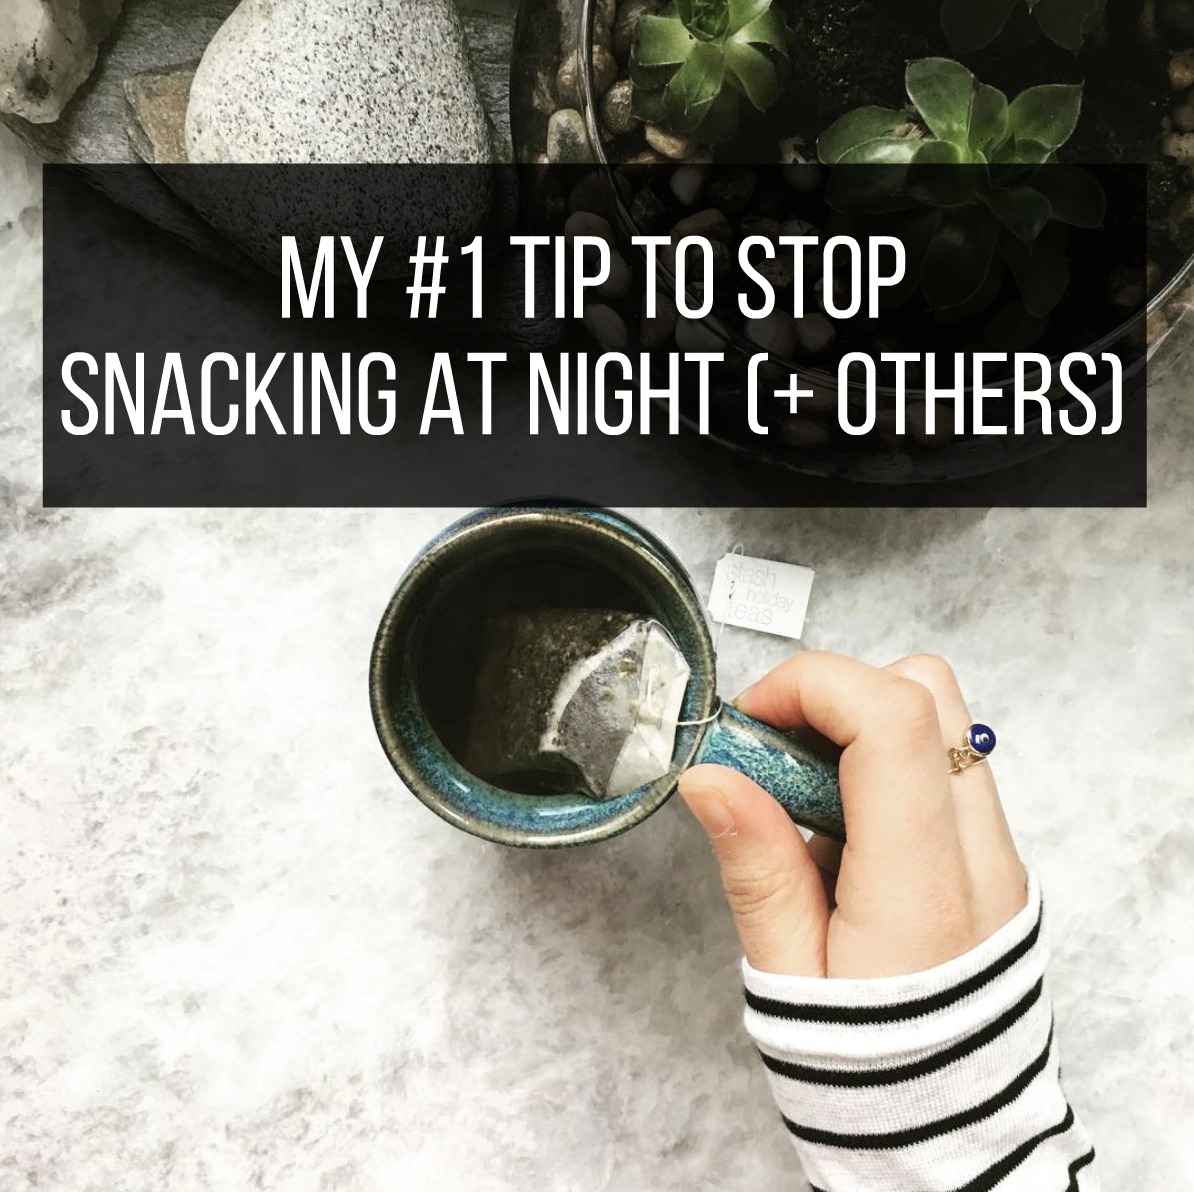 My #1 Tip to Stop Snacking at Night (+ others)